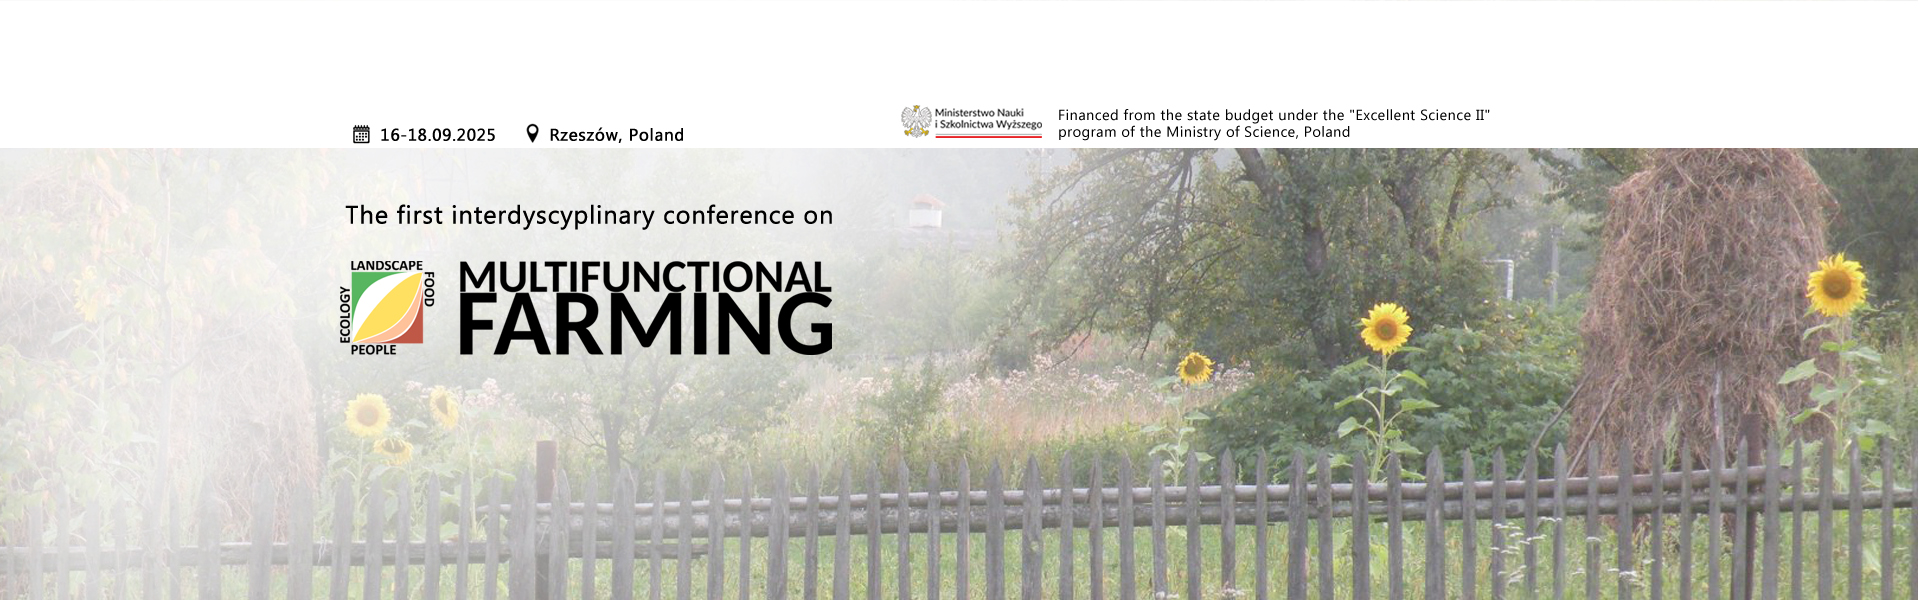 Multifunctional Farming Conference